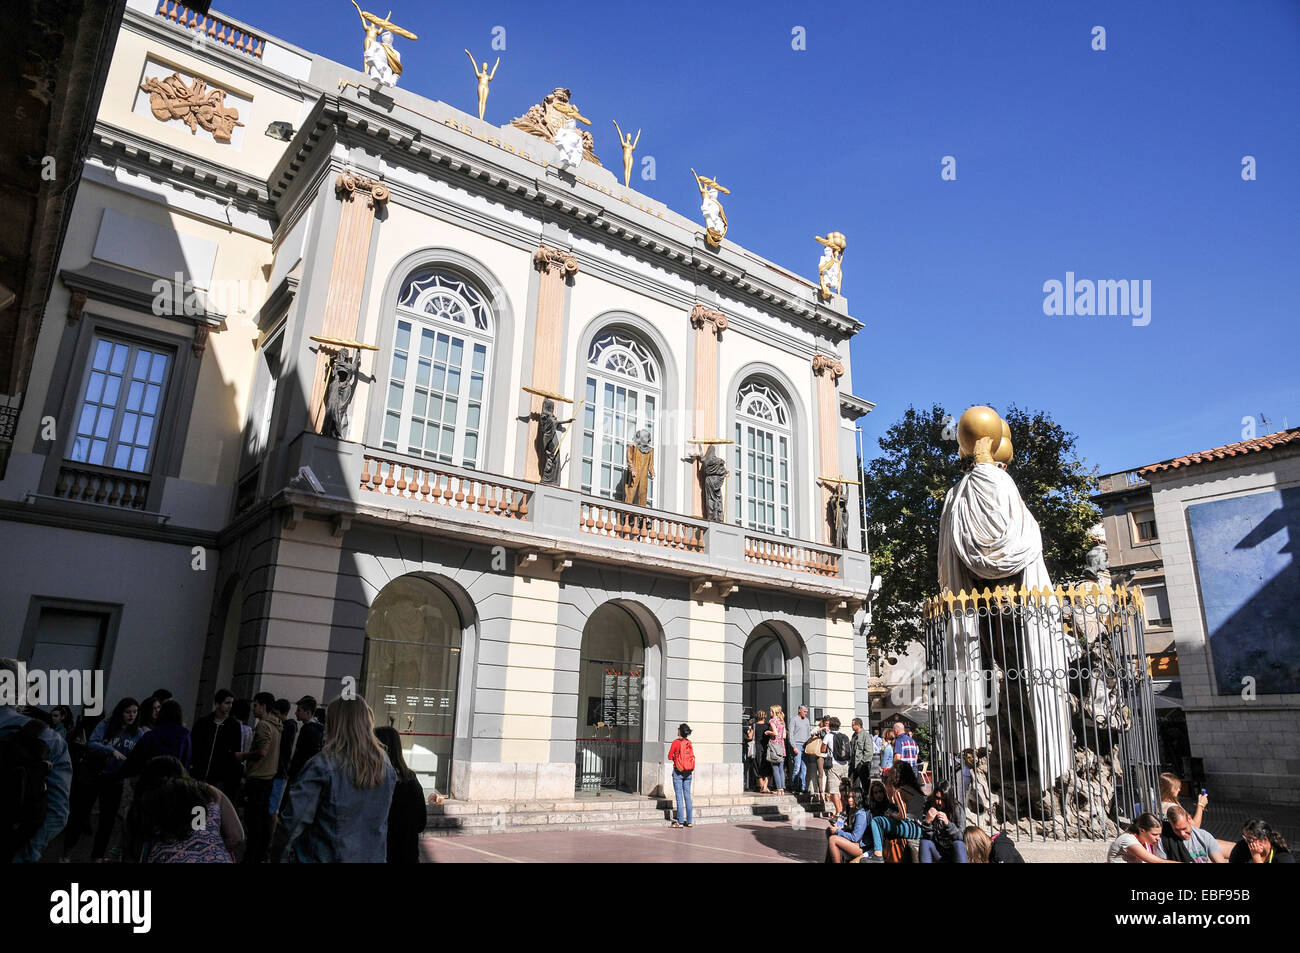 Dali Theatre and Museum, Figueres, in Catalonia, Spain. Stock Photo